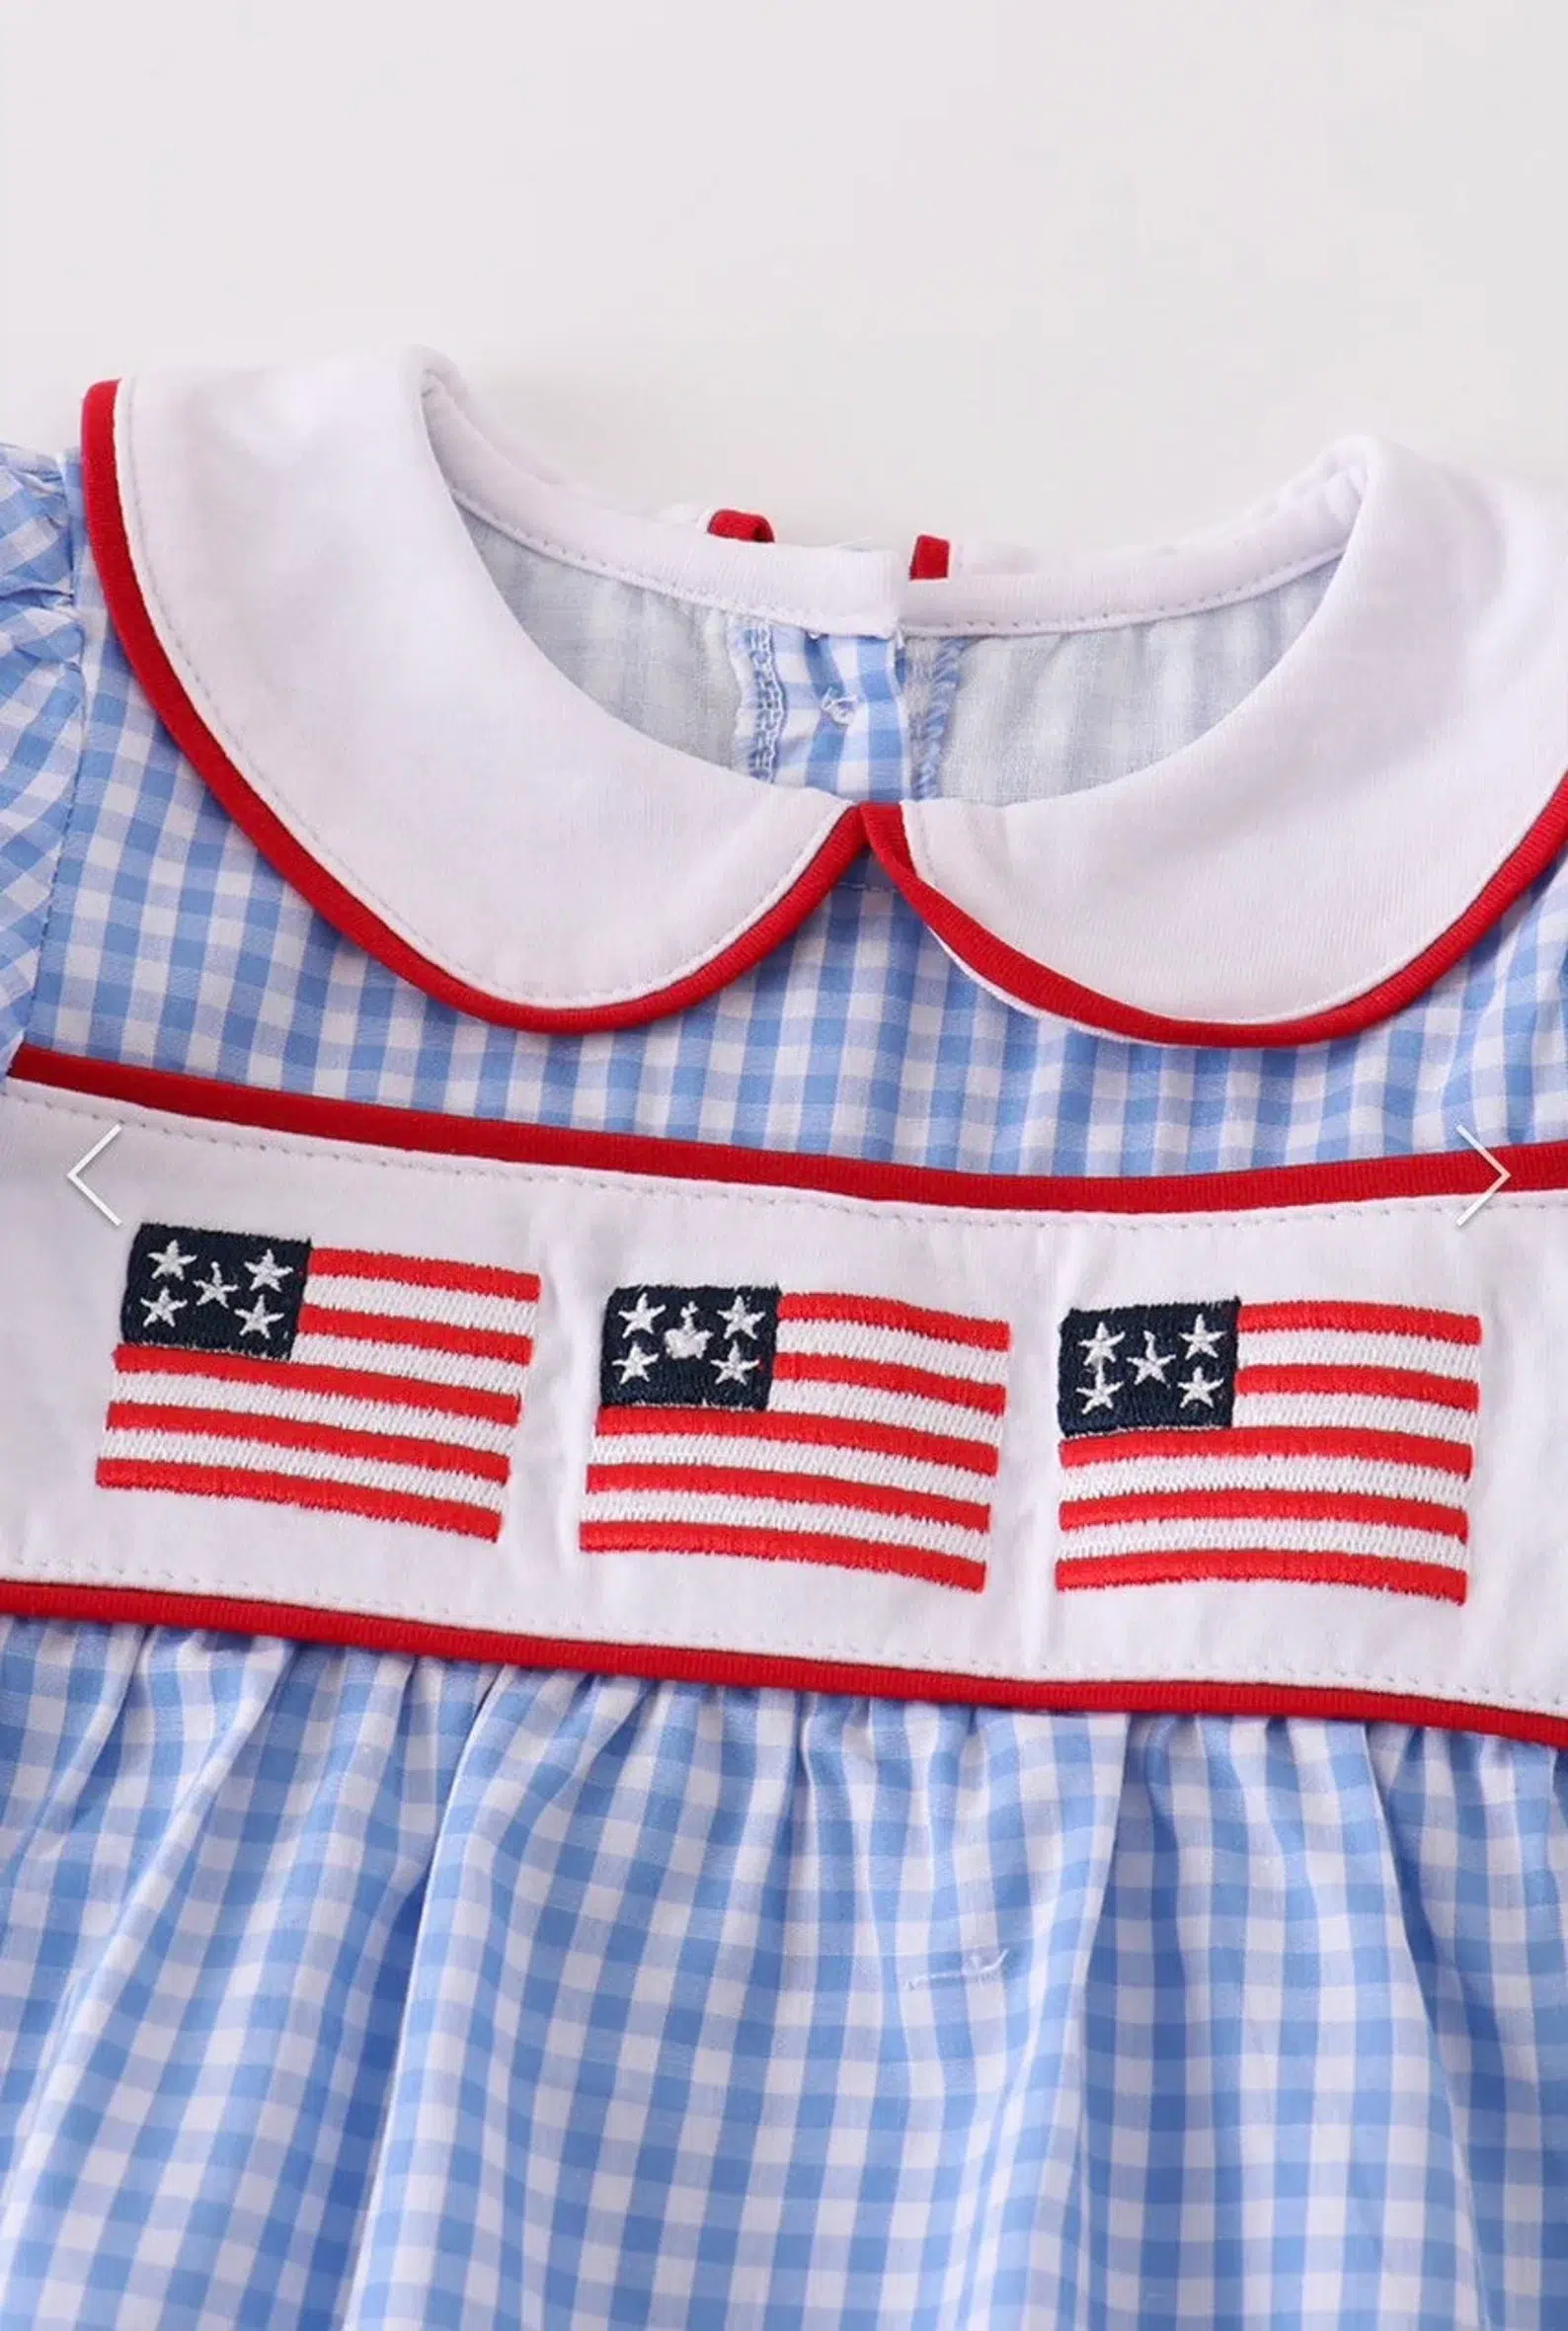 Smocked Bodysuit Patriotic Outfit for Baby Girls